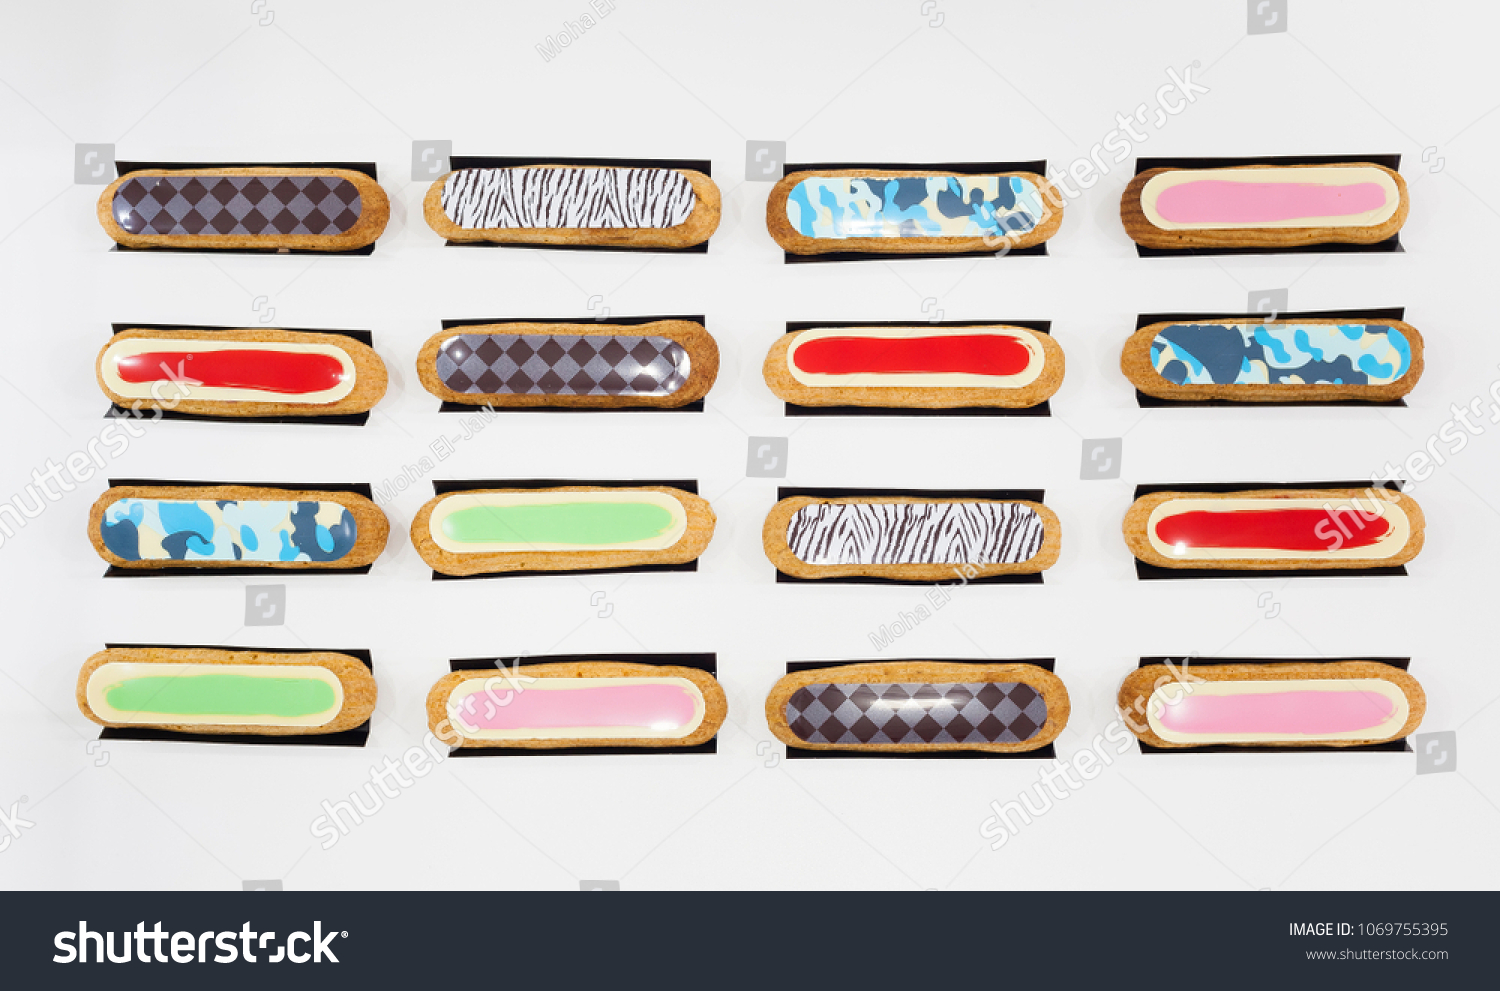 Top view shot of sixteen eclairs of various flavours. The eclair is a typical french pastry filled with flavoured cream #1069755395